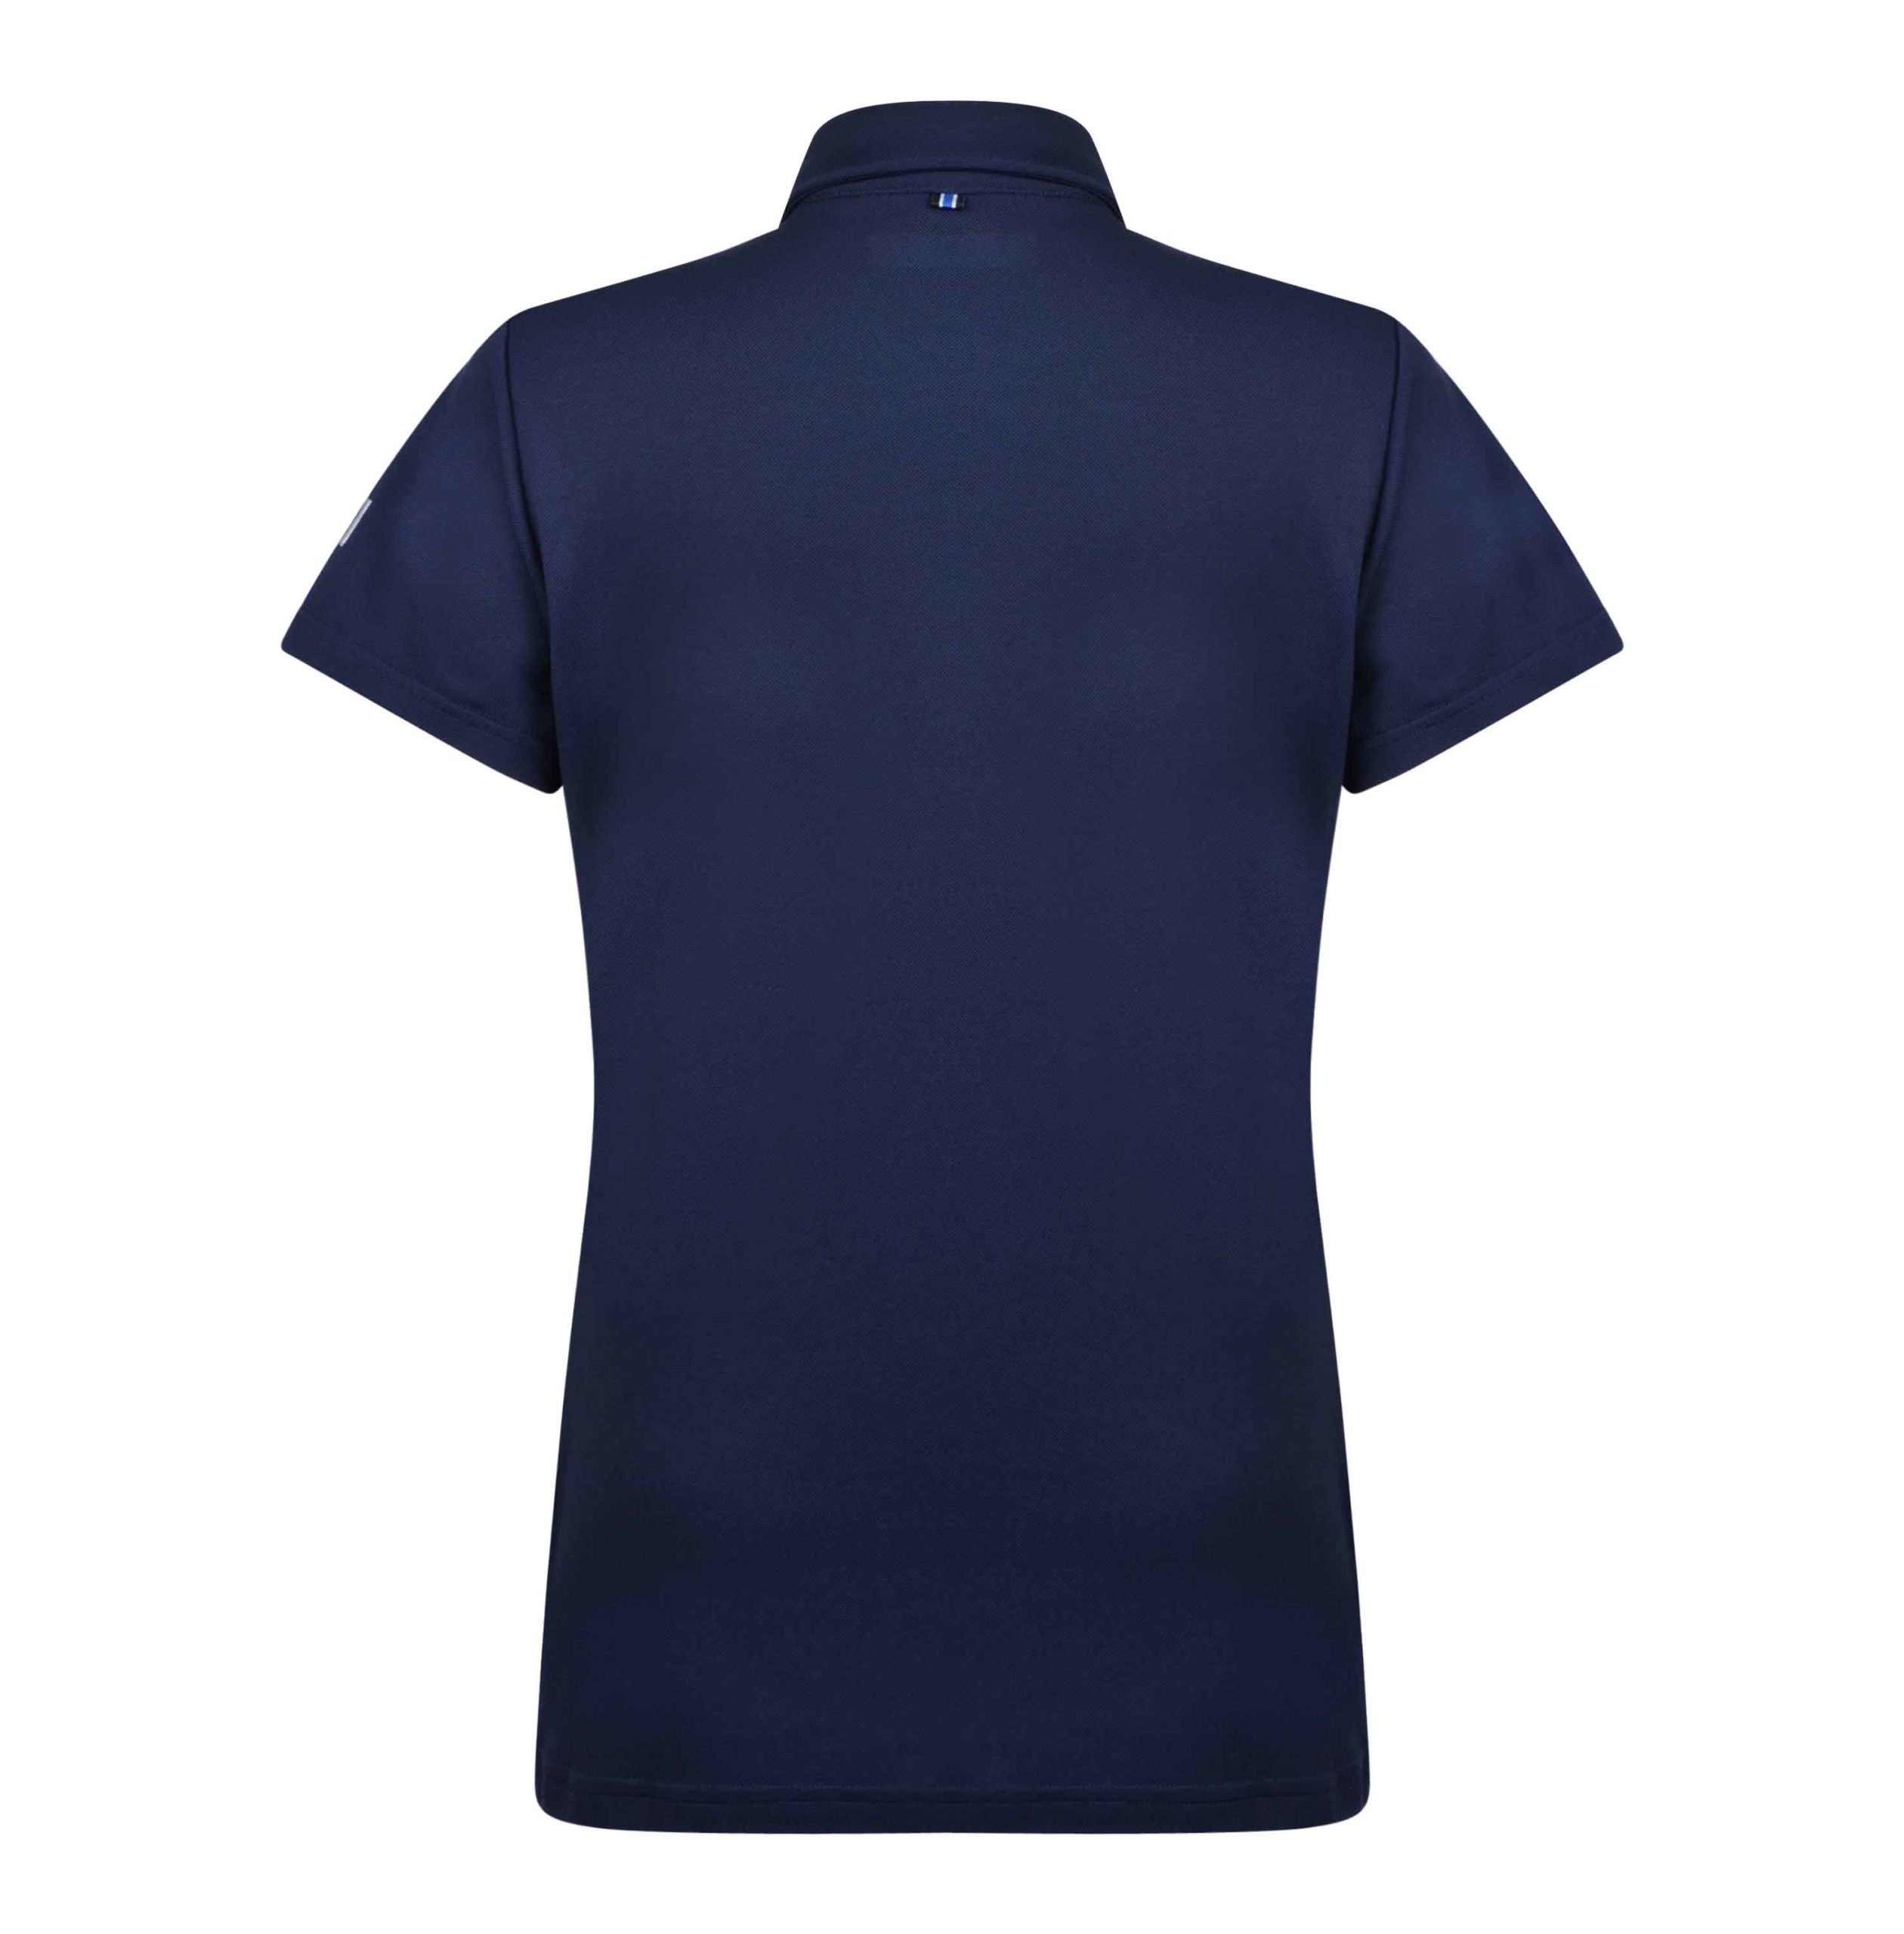 navy and white polo shirt